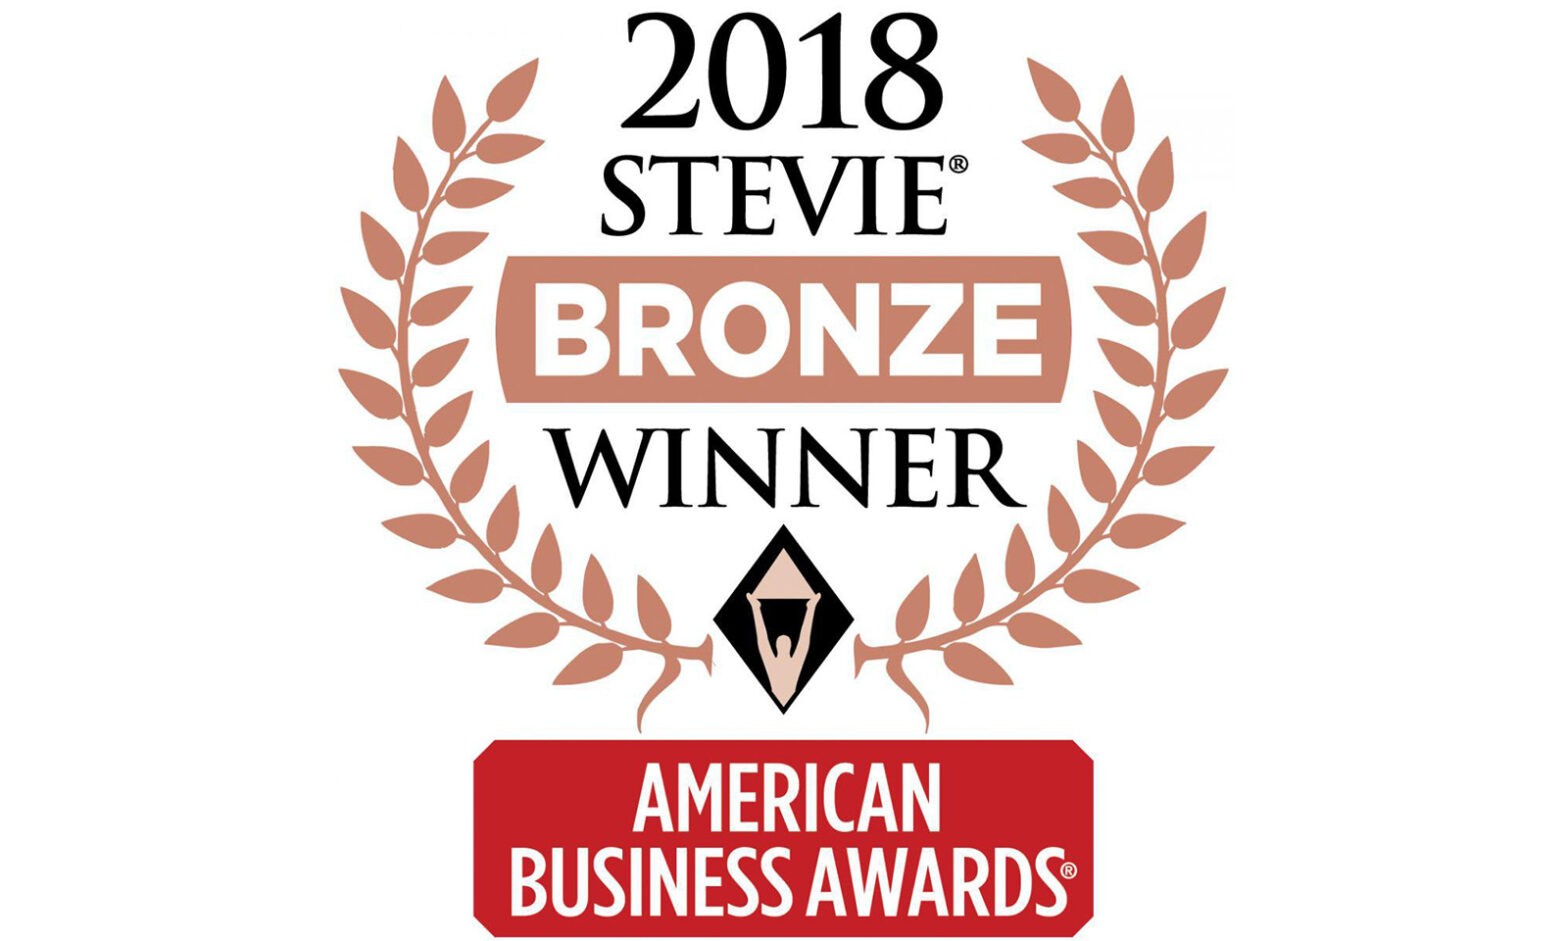 V Digital Services is a Winner in the American Business Awards